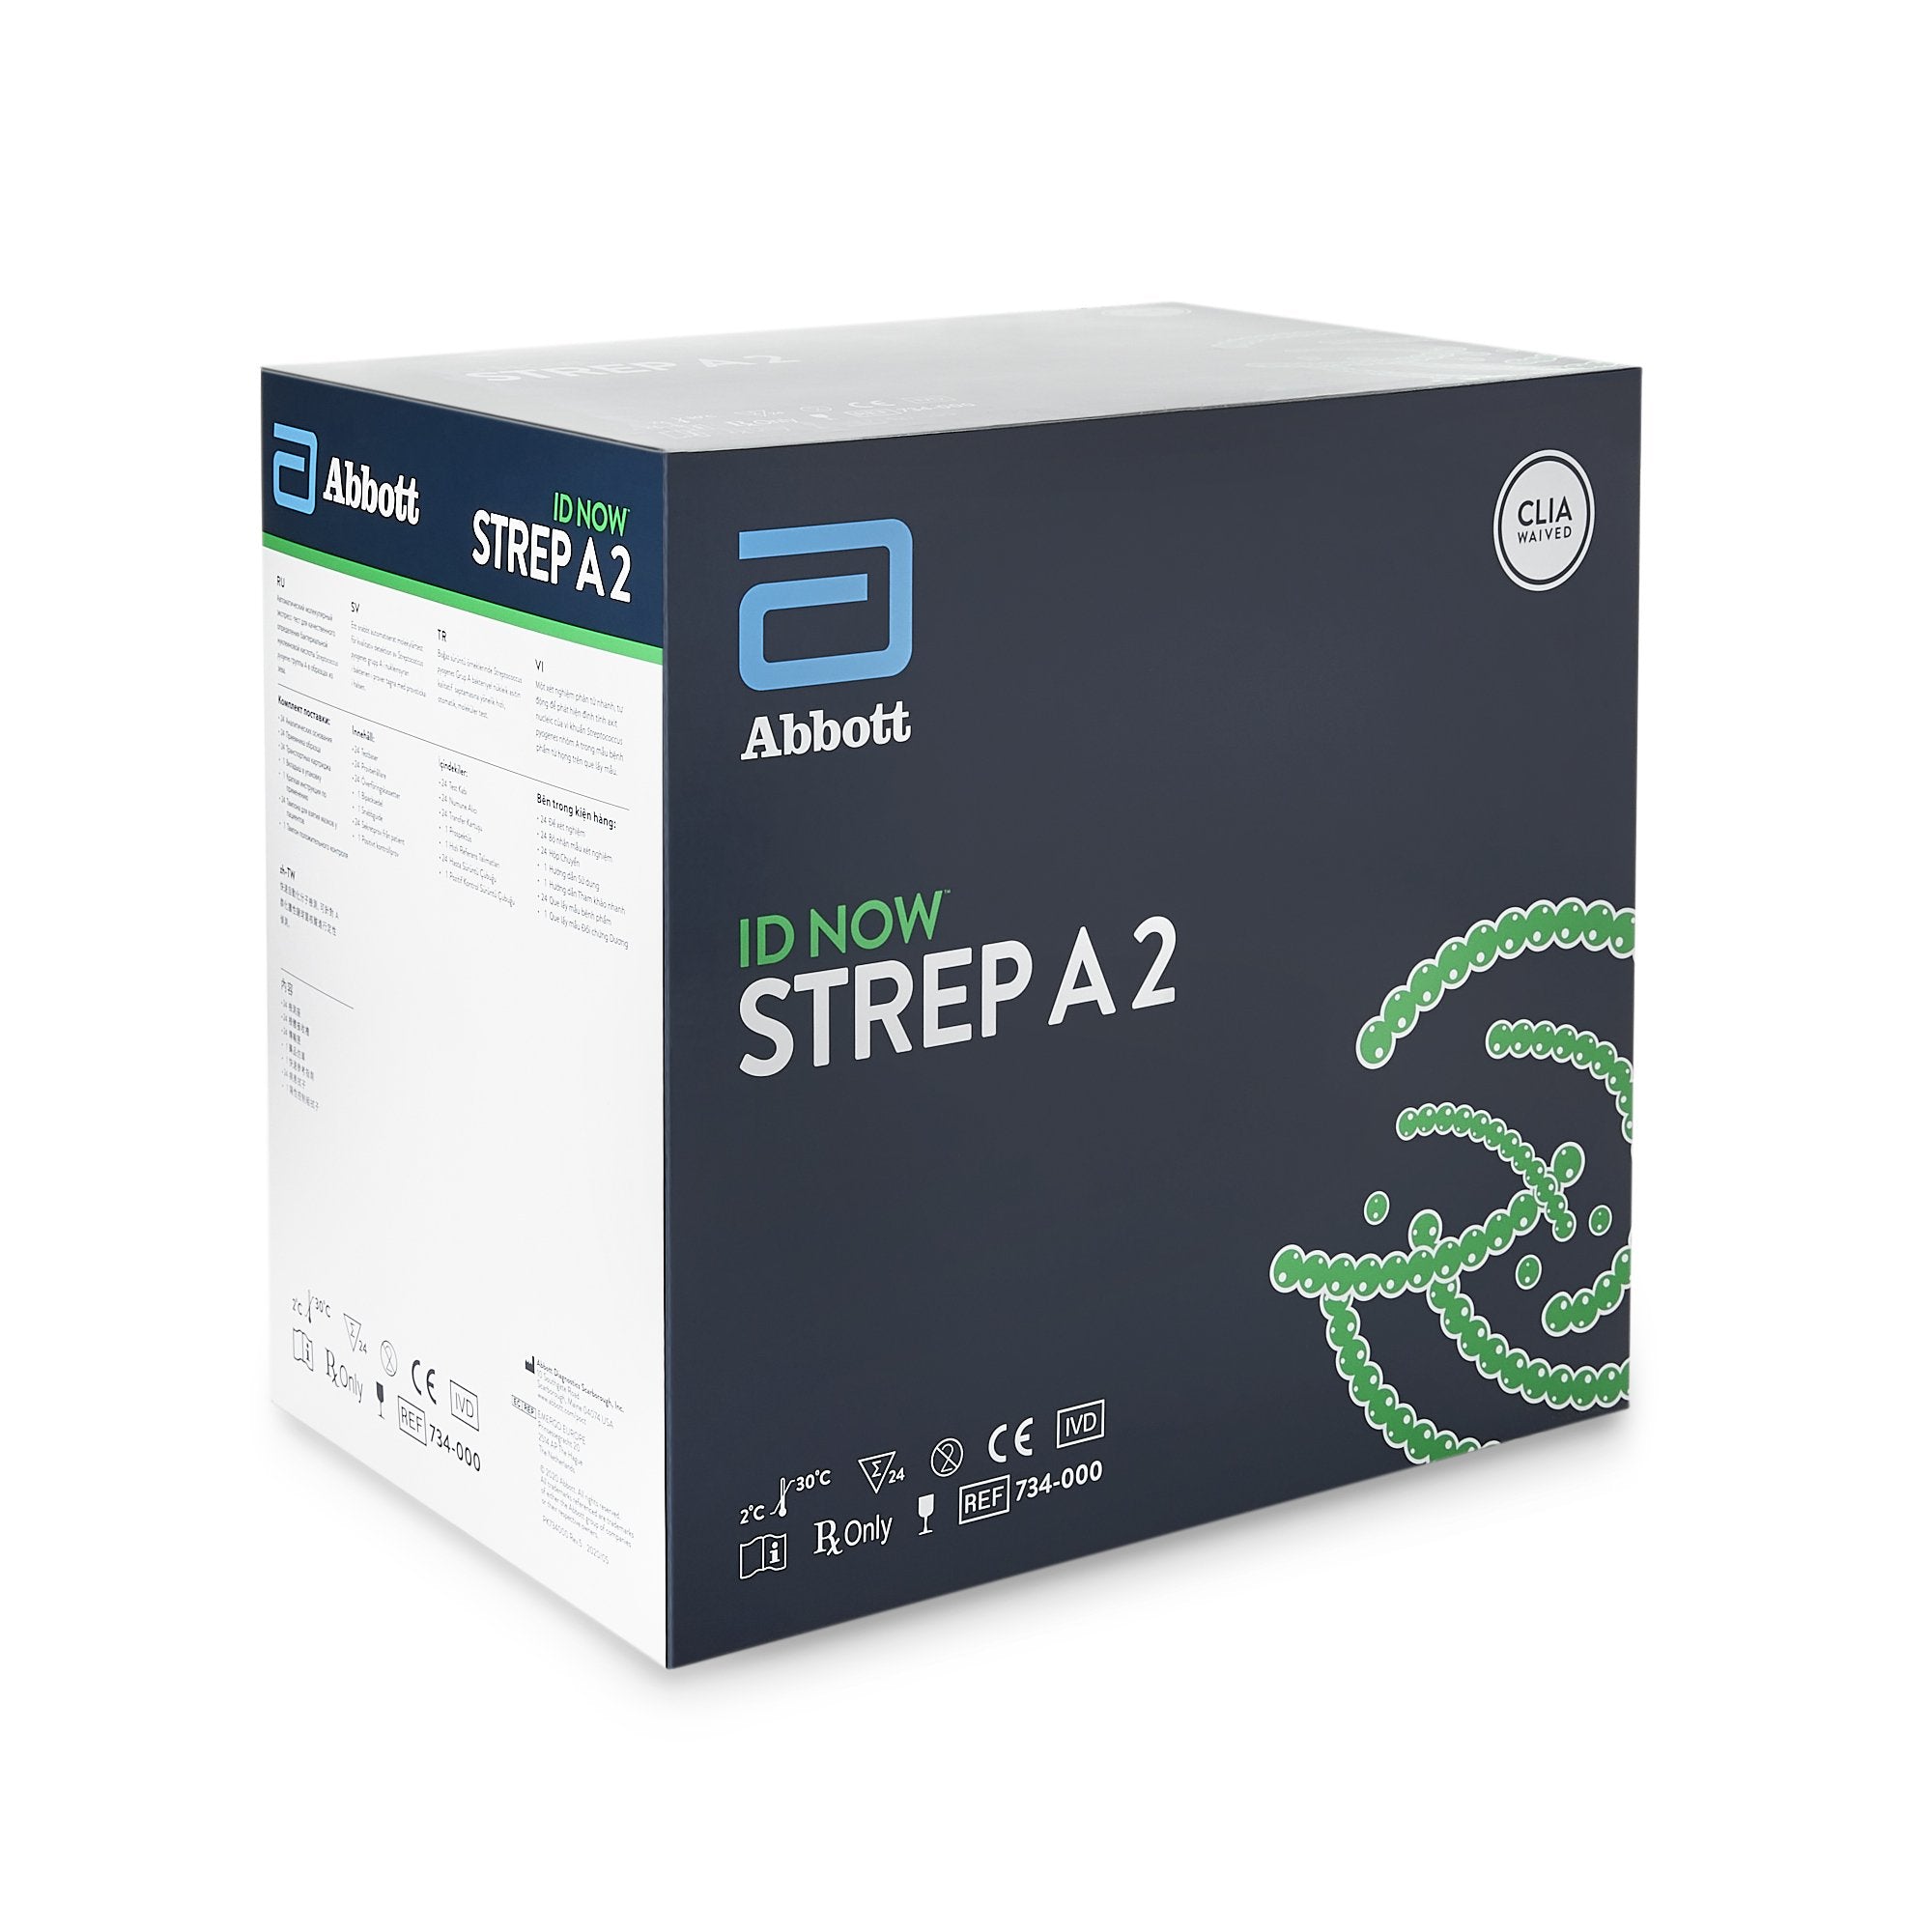 Respiratory Test Kit ID NOW Strep A 2.0 Molecular Diagnostic Strep A Test Throat Swab Sample 24 Tests CLIA Waived